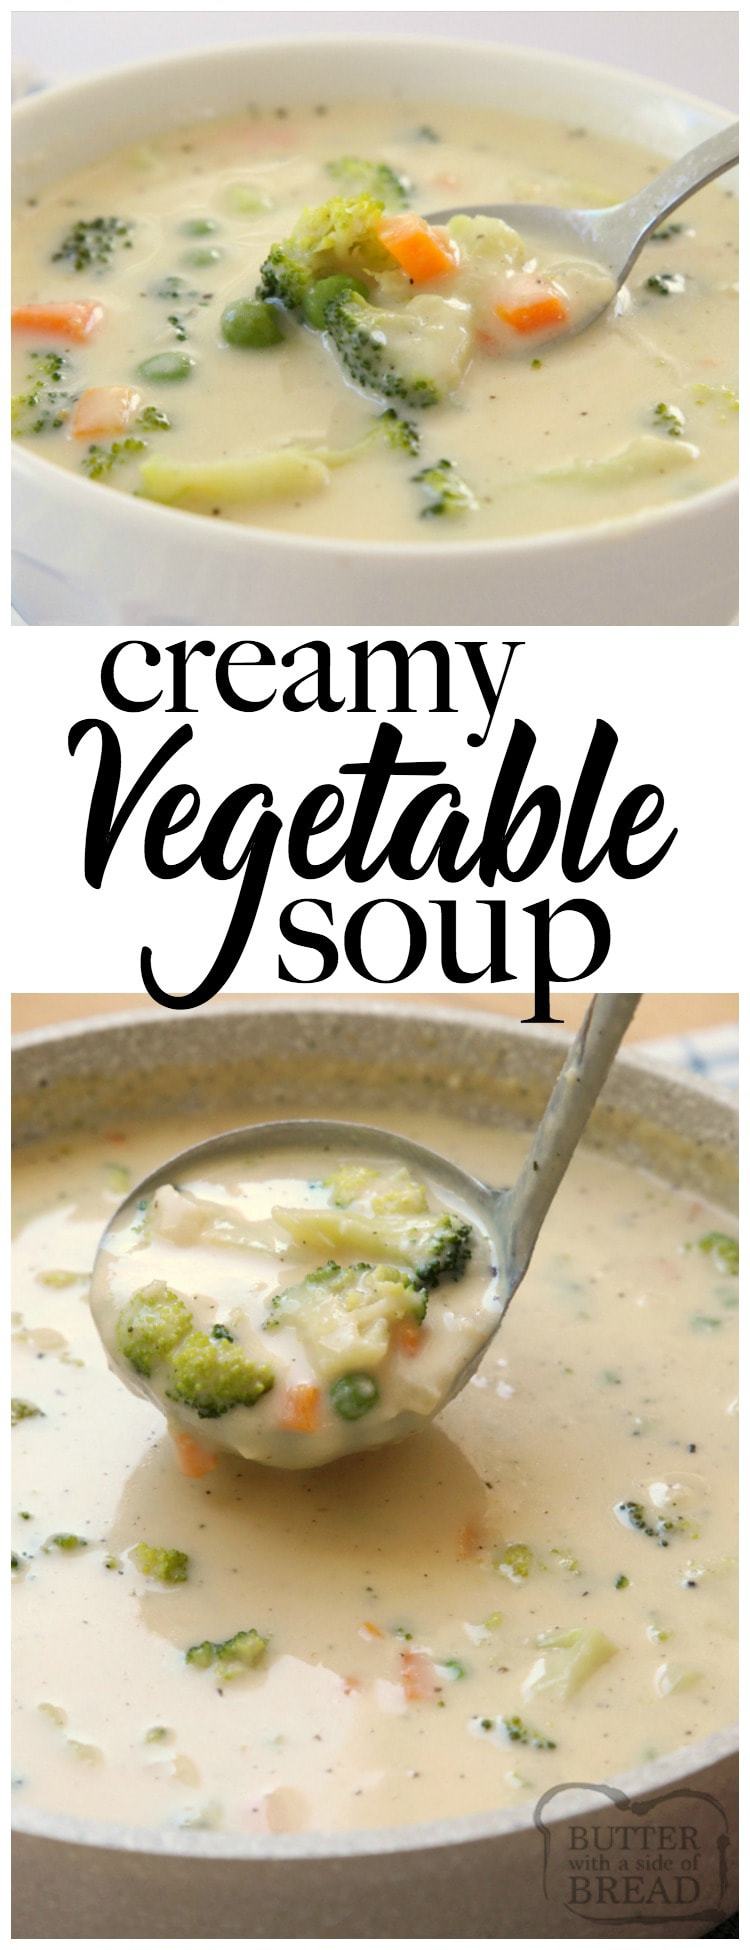 Creamy Vegetable Soup made easy in 30 minutes or less! Simple, flavorful & comforting vegetable soup recipe perfect for cold nights. Time saving tips included too! Simple #vegetable #soup #chowder #recipe from Butter With A Side of Bread